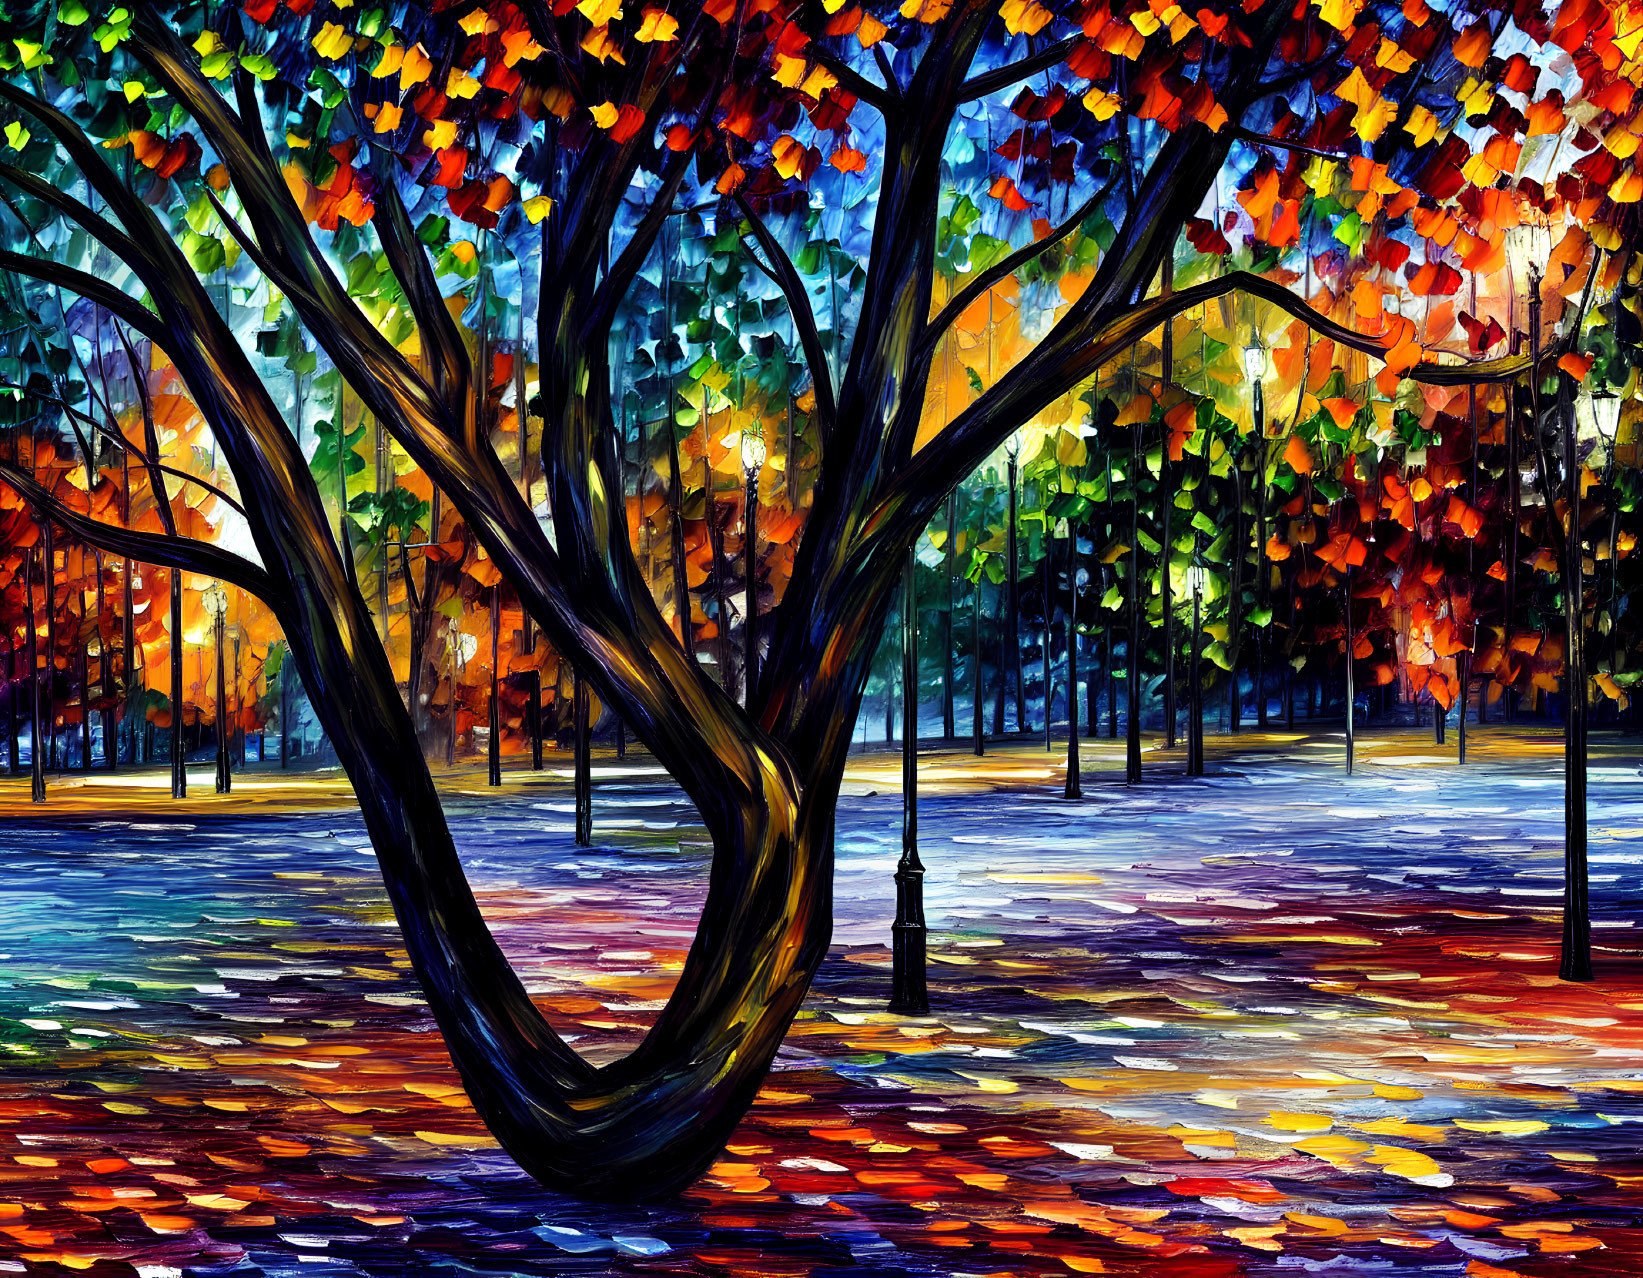 Colorful Park Scene with Twisted Trees and Multicolored Canopy